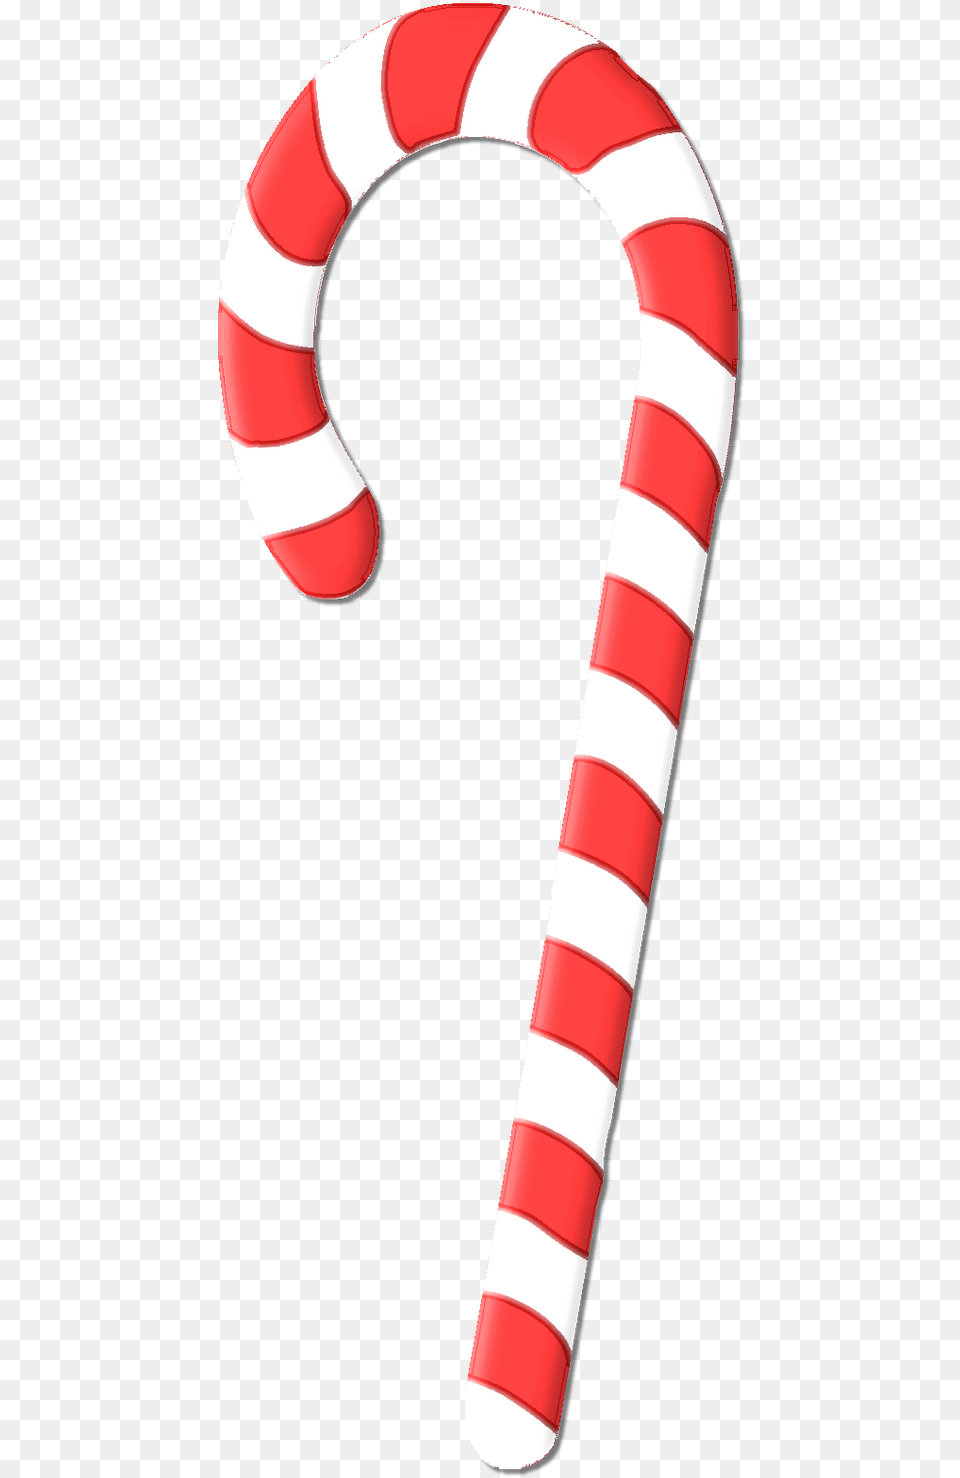 Candy Cane Product Font Line Line Candy Canes On A Line, Food, Sweets, Stick, Dynamite Free Png